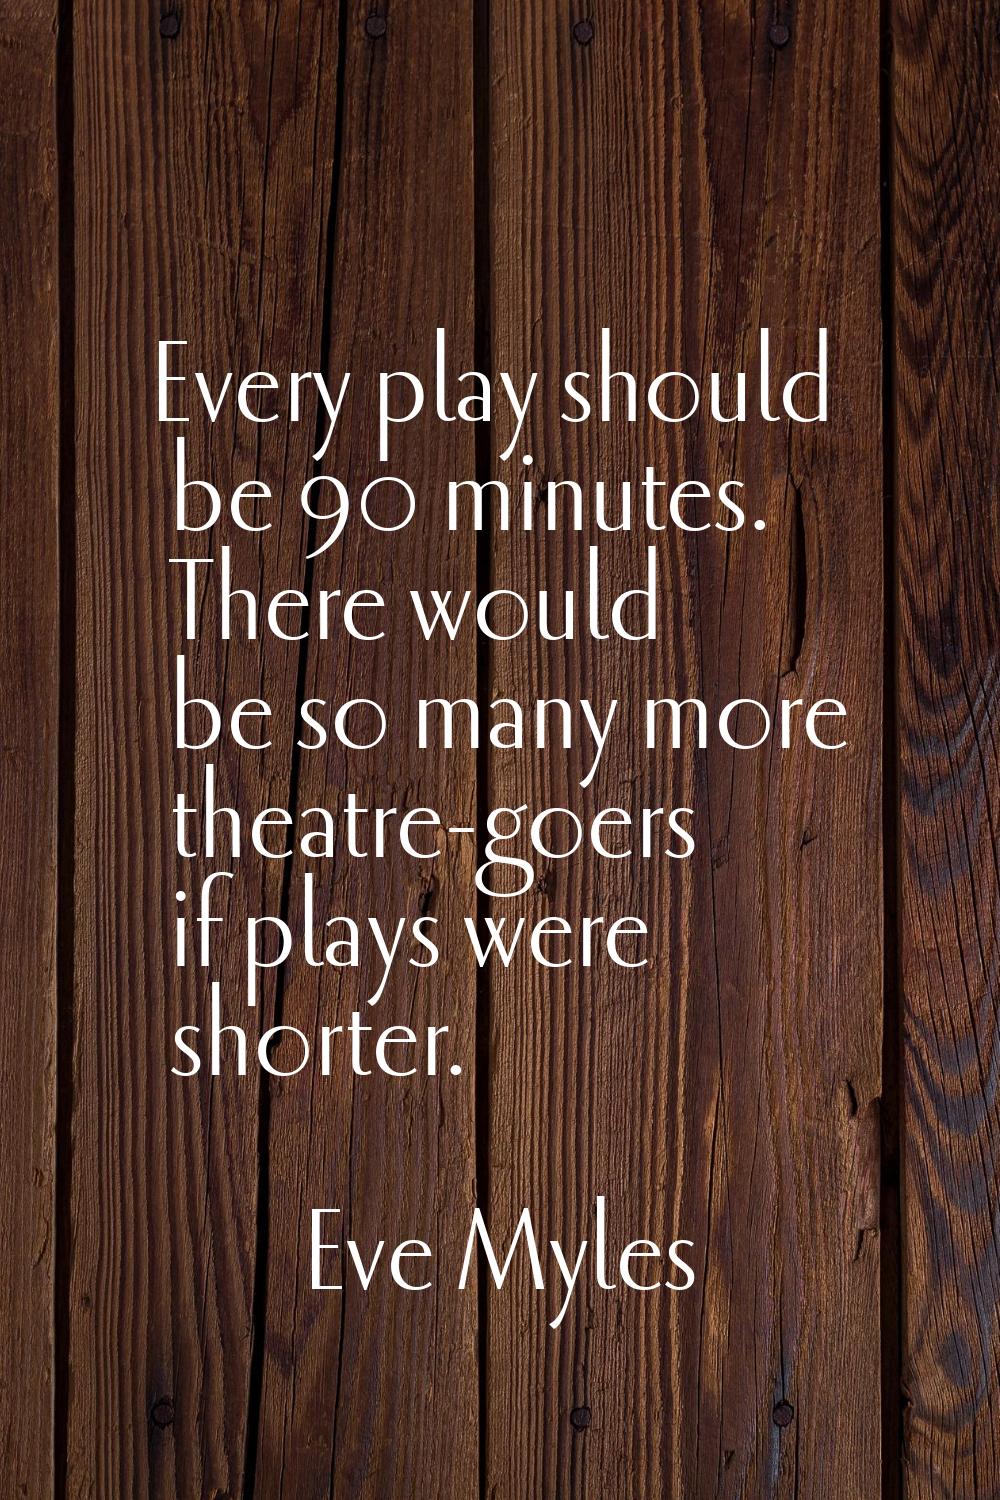 Every play should be 90 minutes. There would be so many more theatre-goers if plays were shorter.